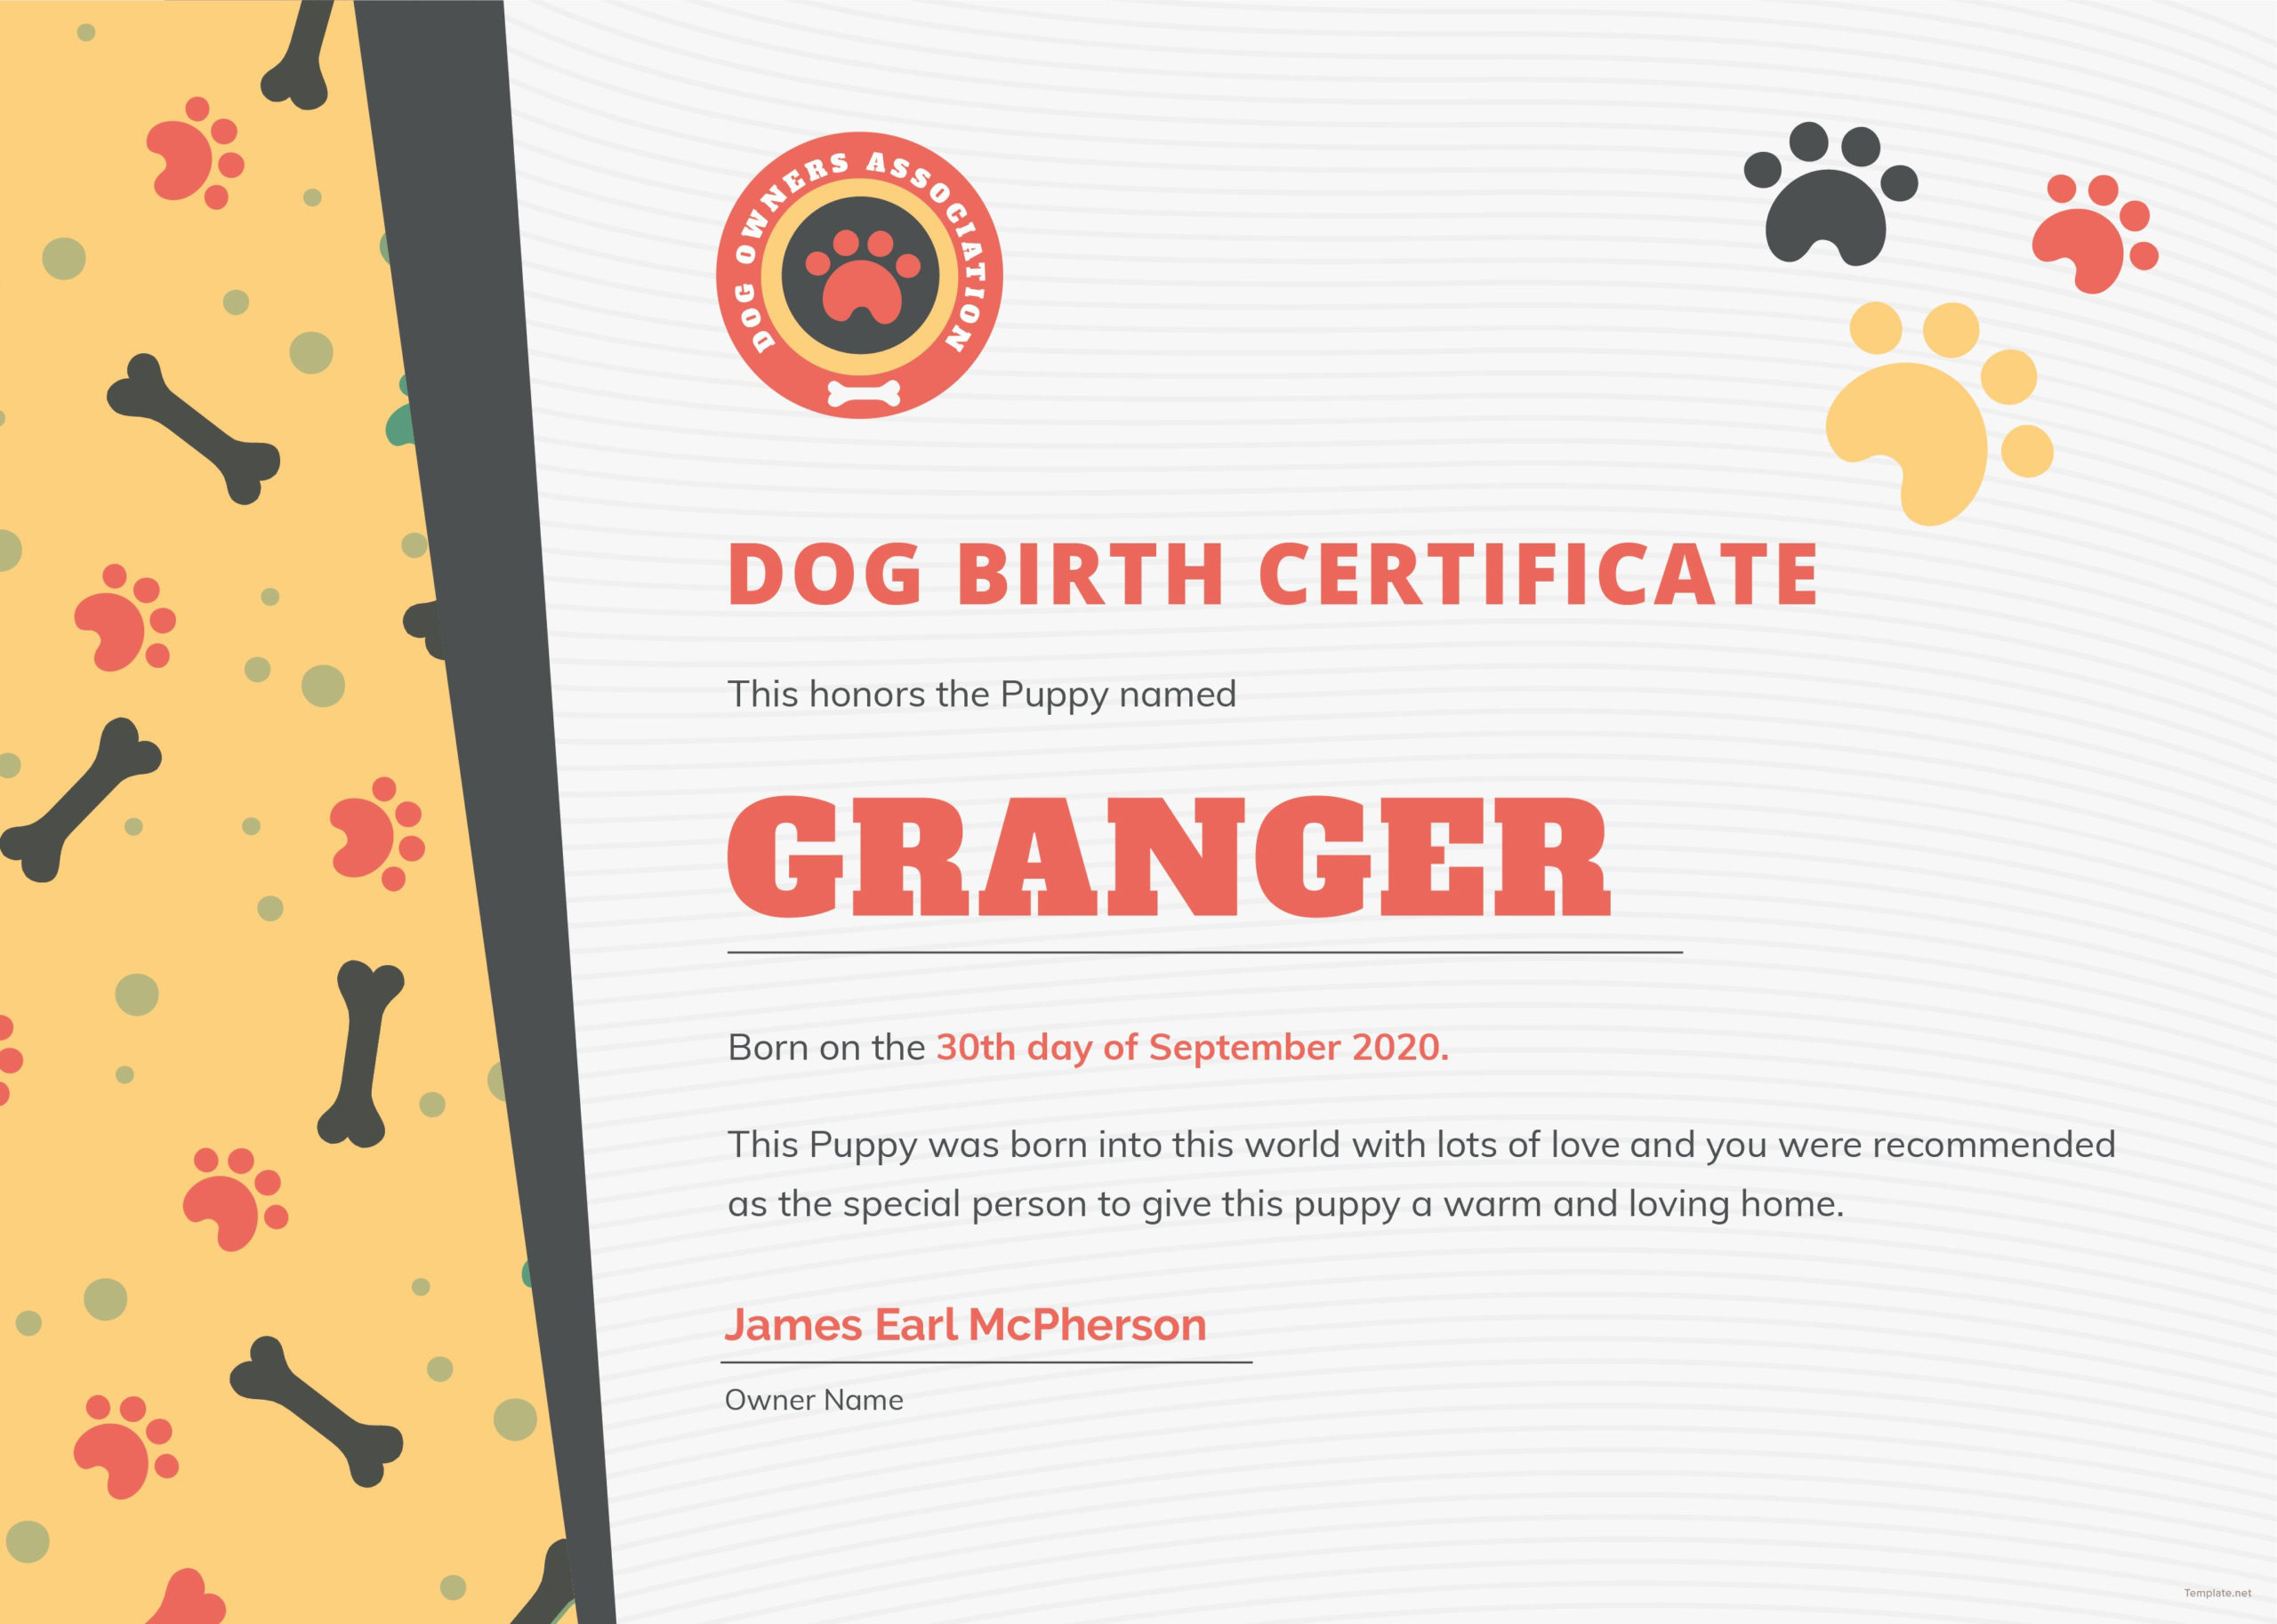 Pinyinelis Vega On Blw Darío  Birth Certificate intended for Best Puppy Birth Certificate Template